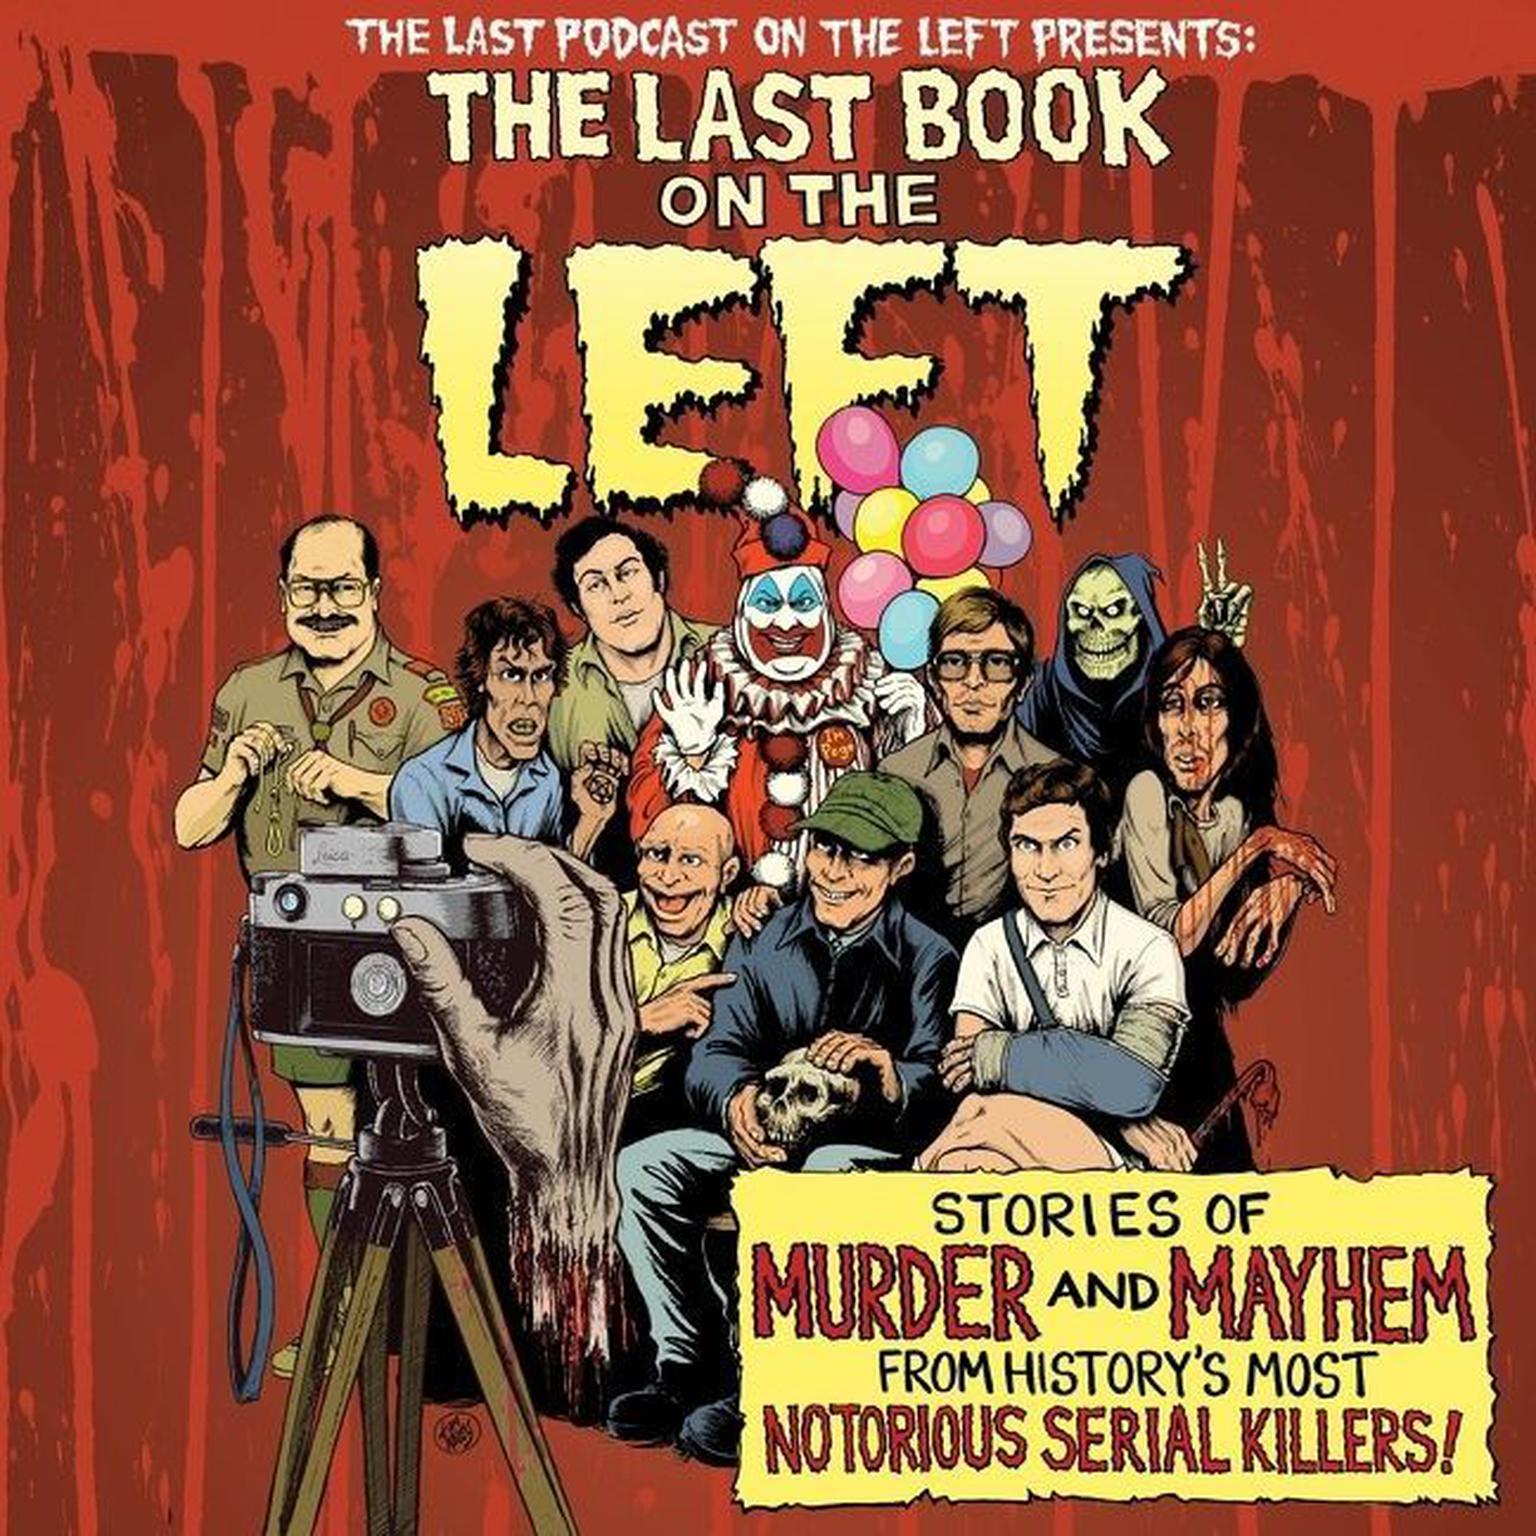 The Last Book On The Left: Stories of Murder and Mayhem from Historys Most Notorious Serial Killers Audiobook, by Ben Kissel